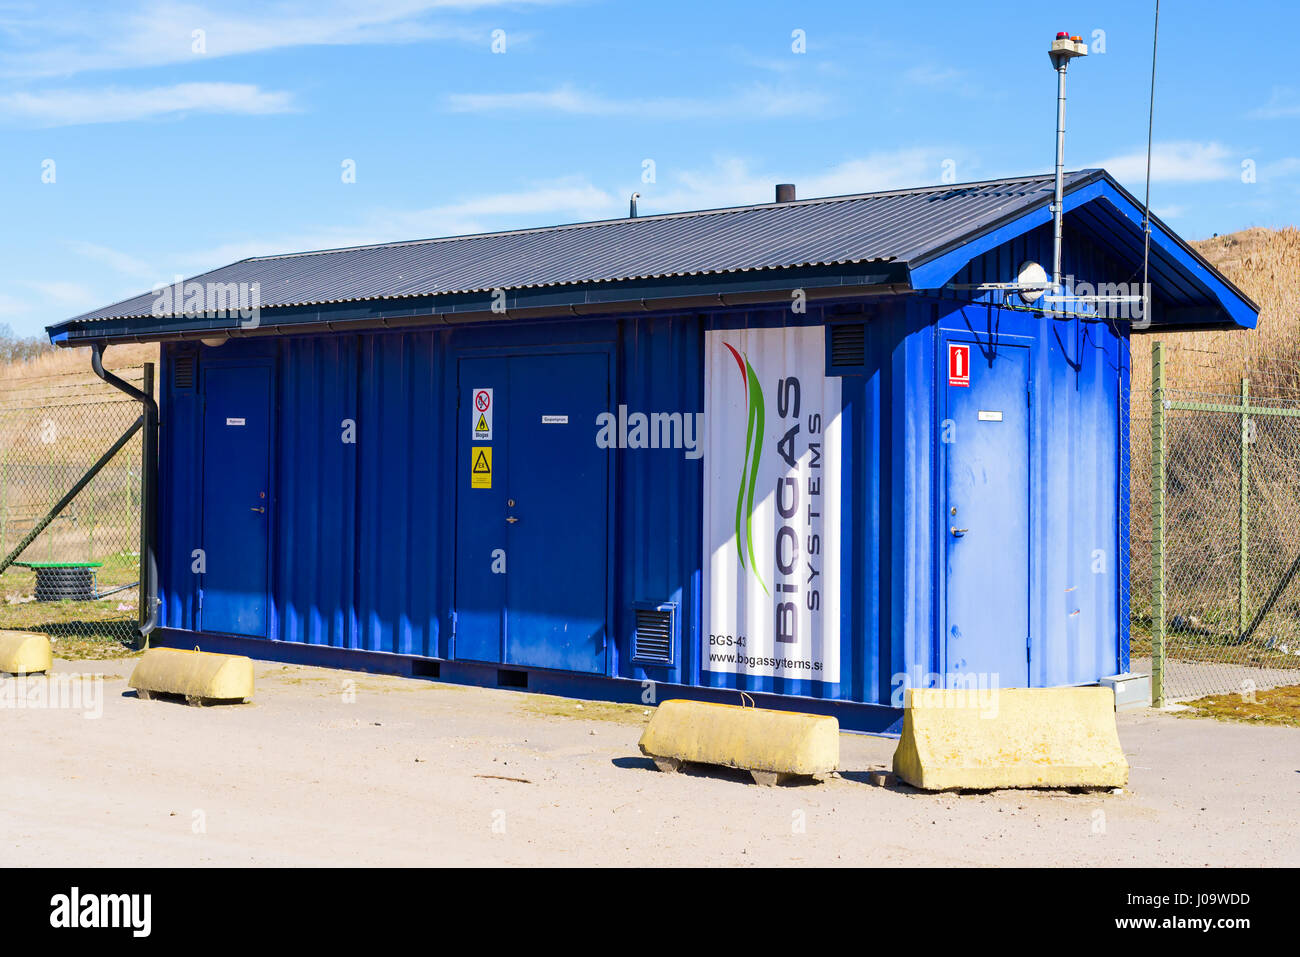 Ronneby, Sweden - March 27, 2017: Documentary of public waste station. Automated landfill gas station control and pump building. Stock Photo